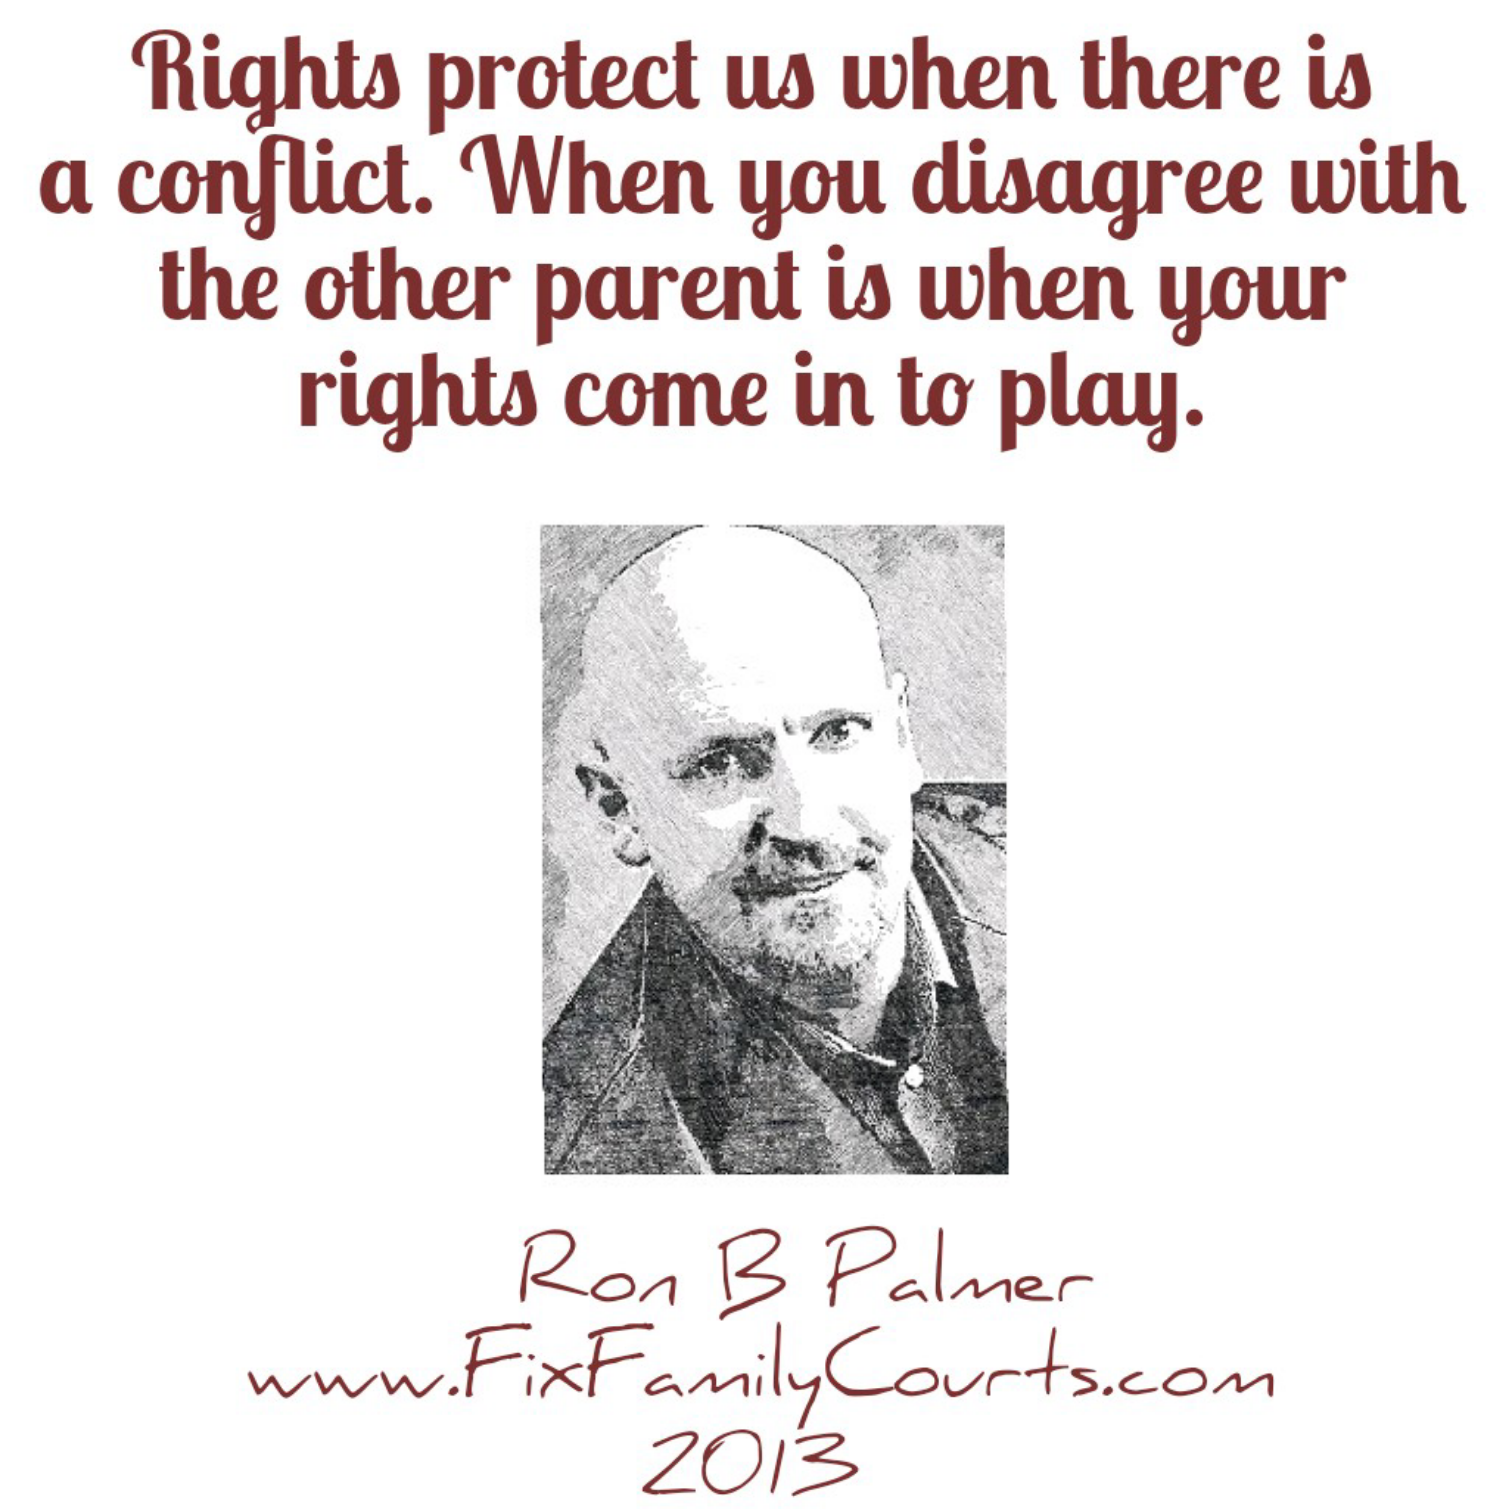 Rights protect us when there is a conflict. When you disagree with the other parent is when your rights come in to play.